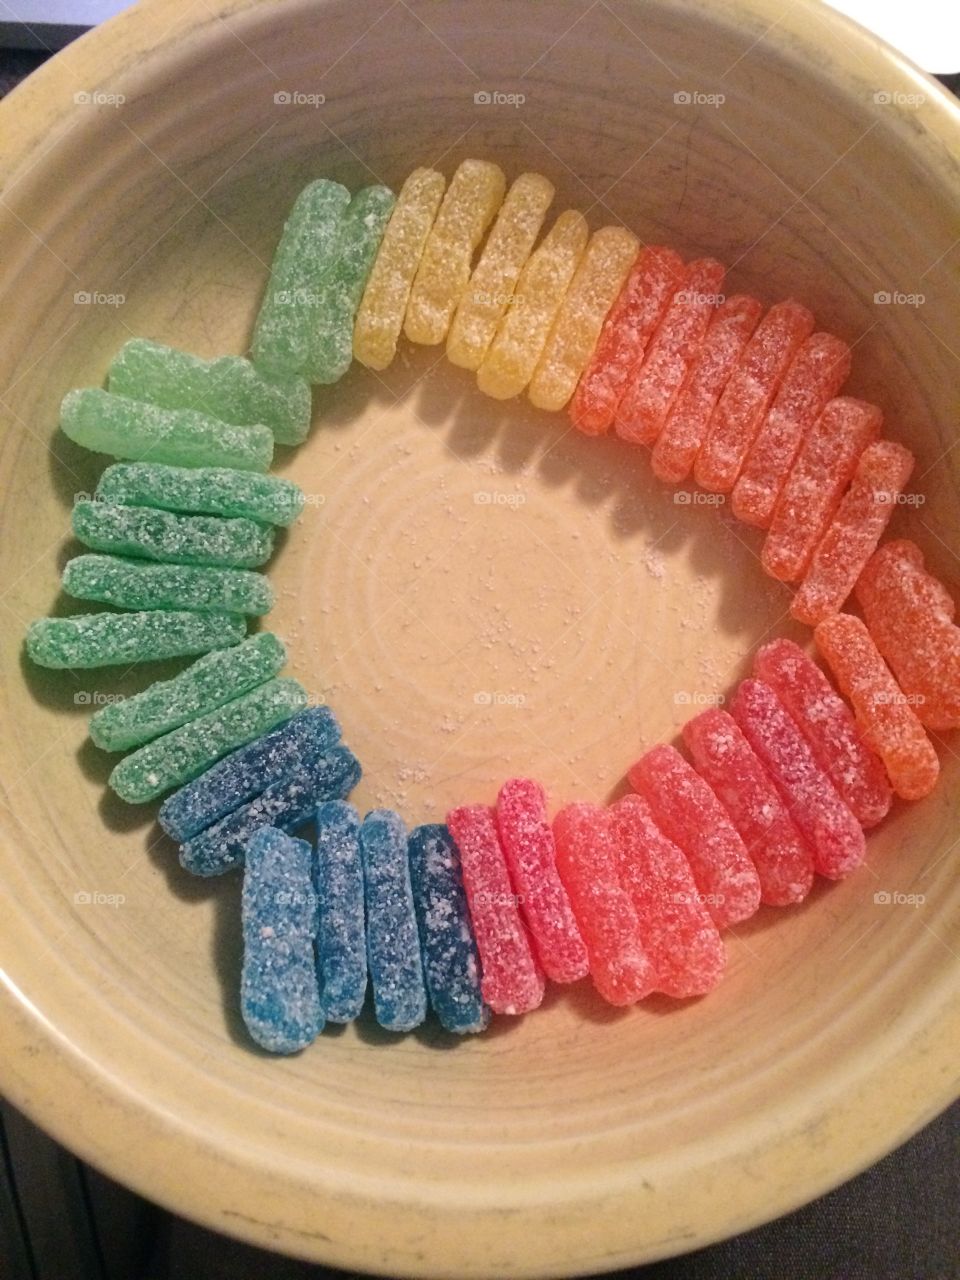 Now that I've got my sour patch organized 